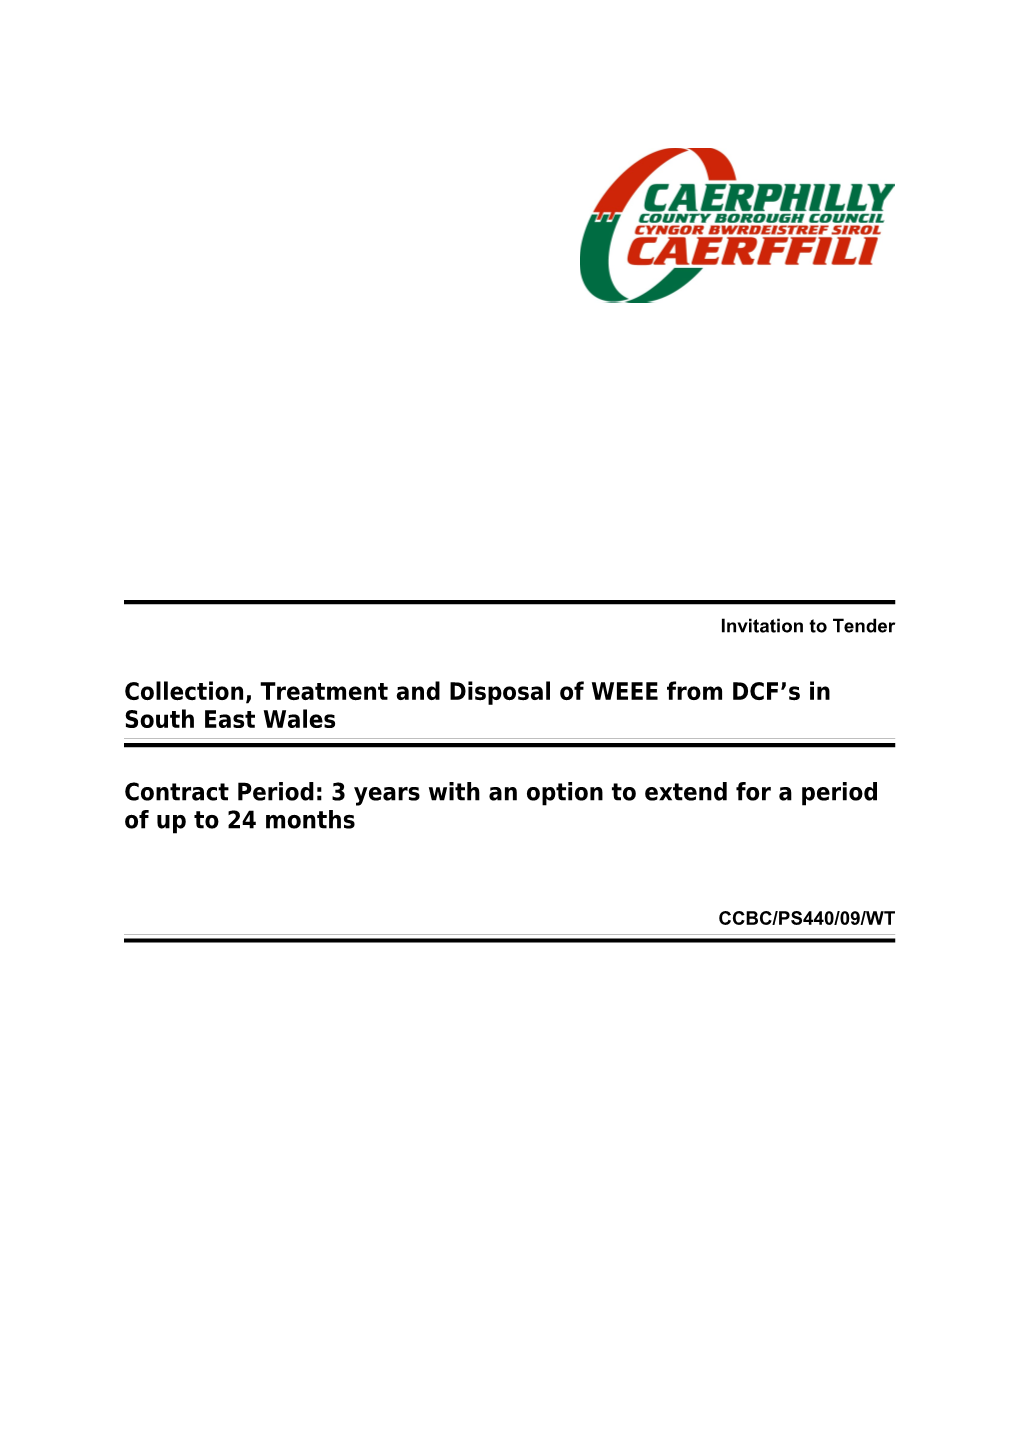 Collection, Treatment and Disposal of WEEE from DCF S in South East Wales